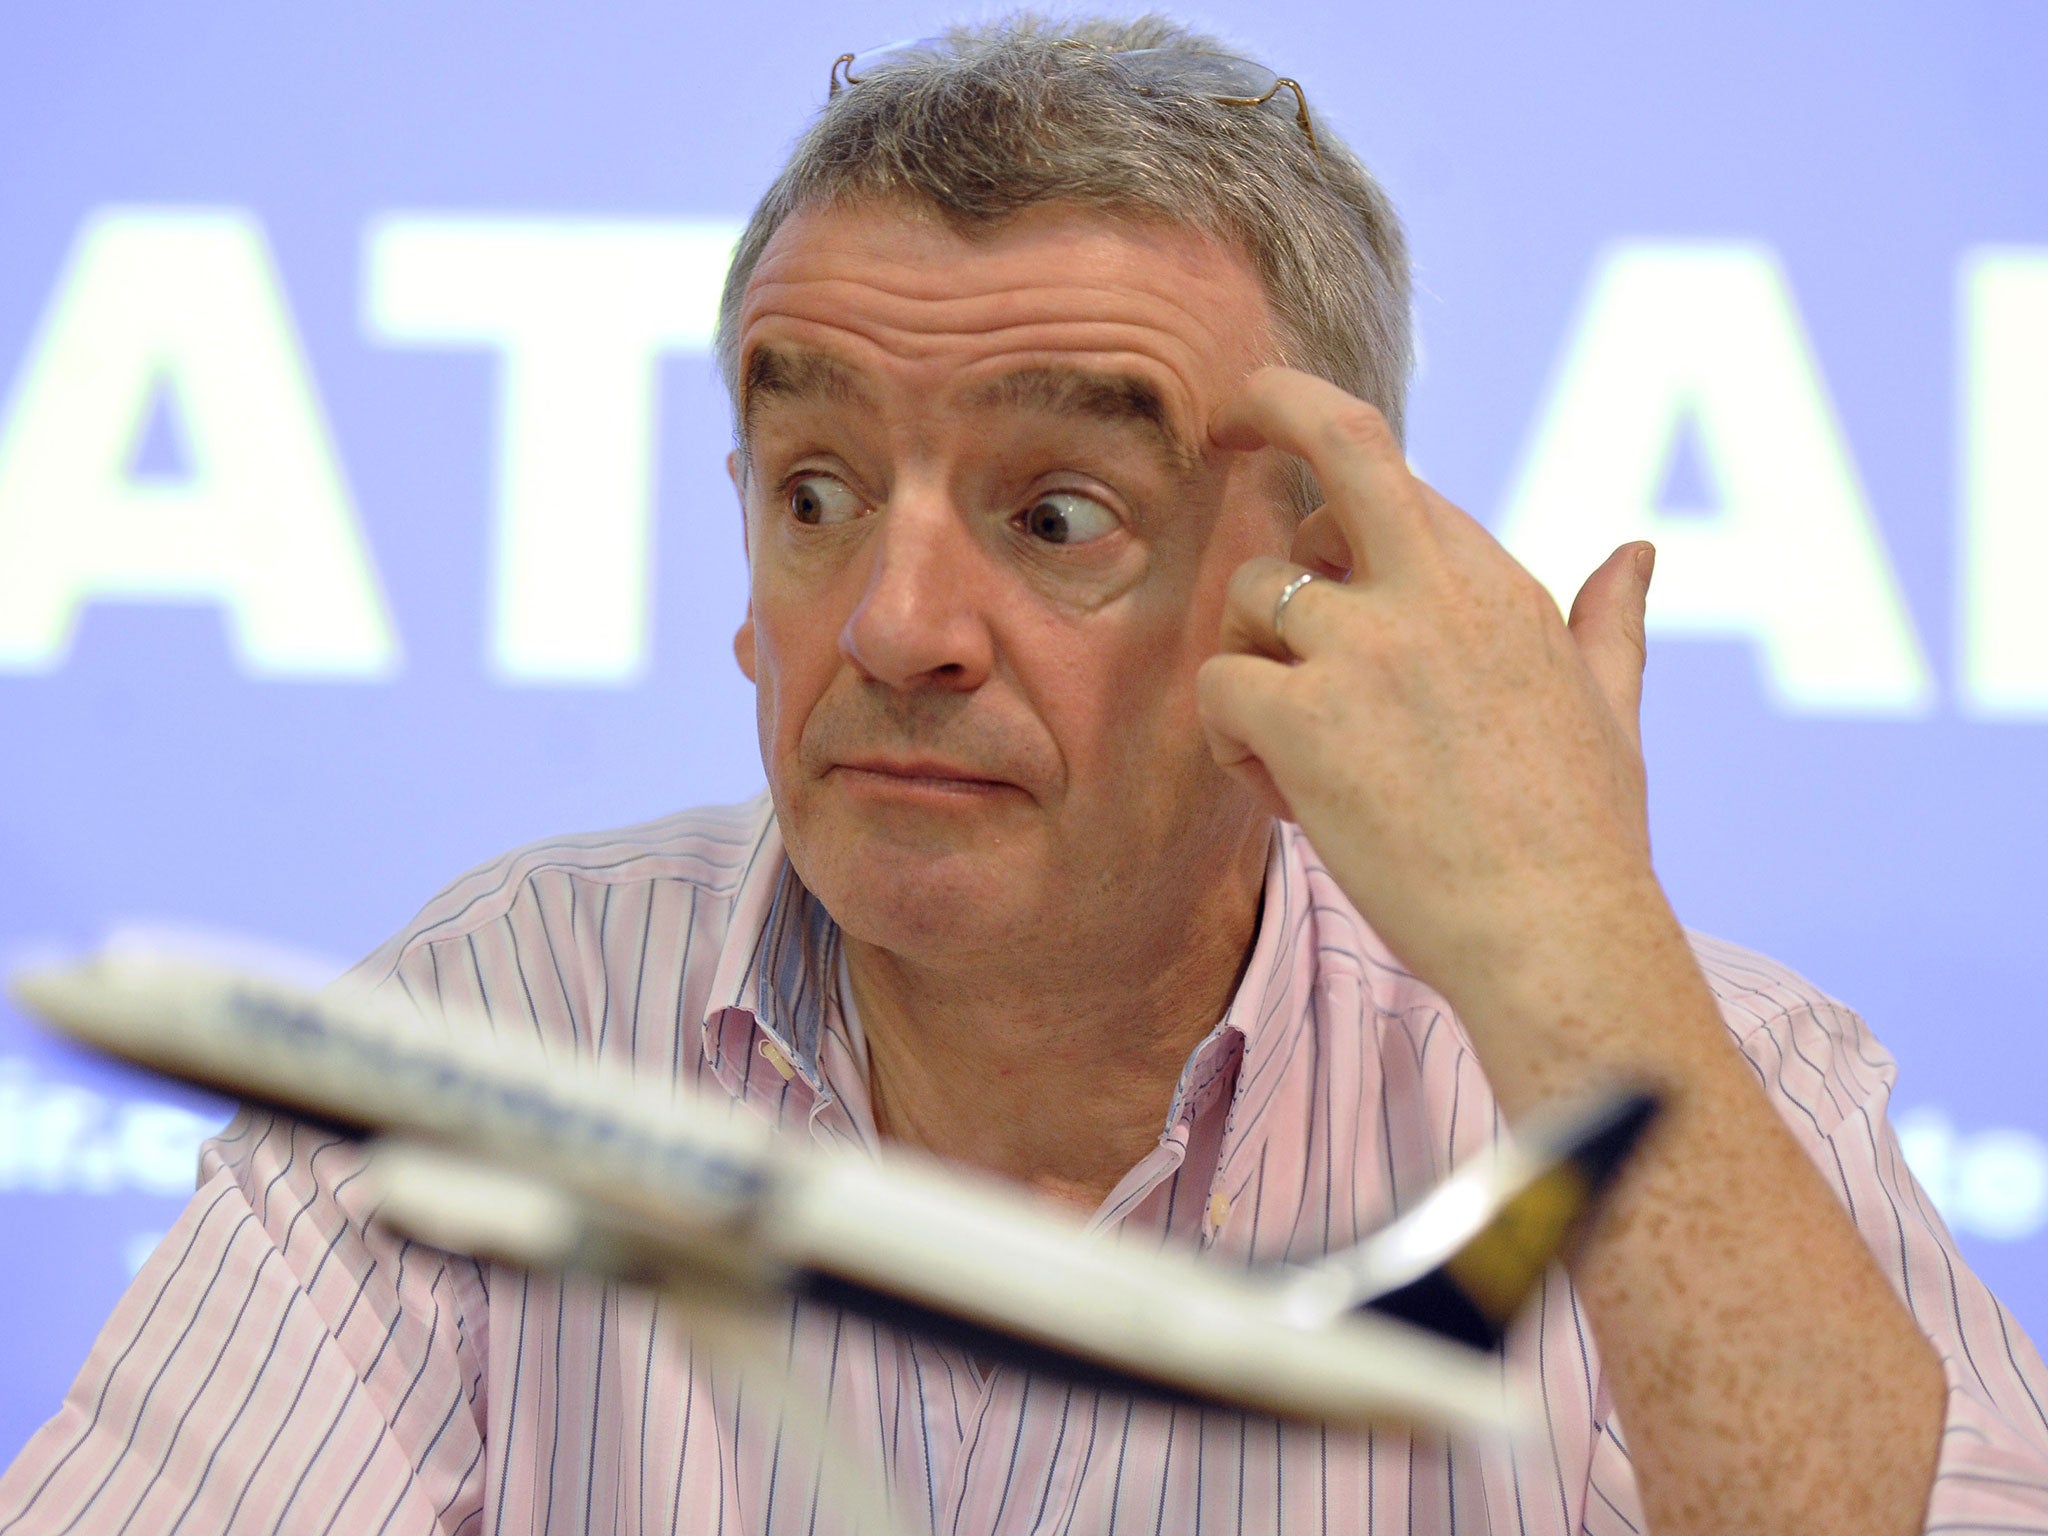 Michael O'Leary ignored harsh criticism and traded jokes on the social network account